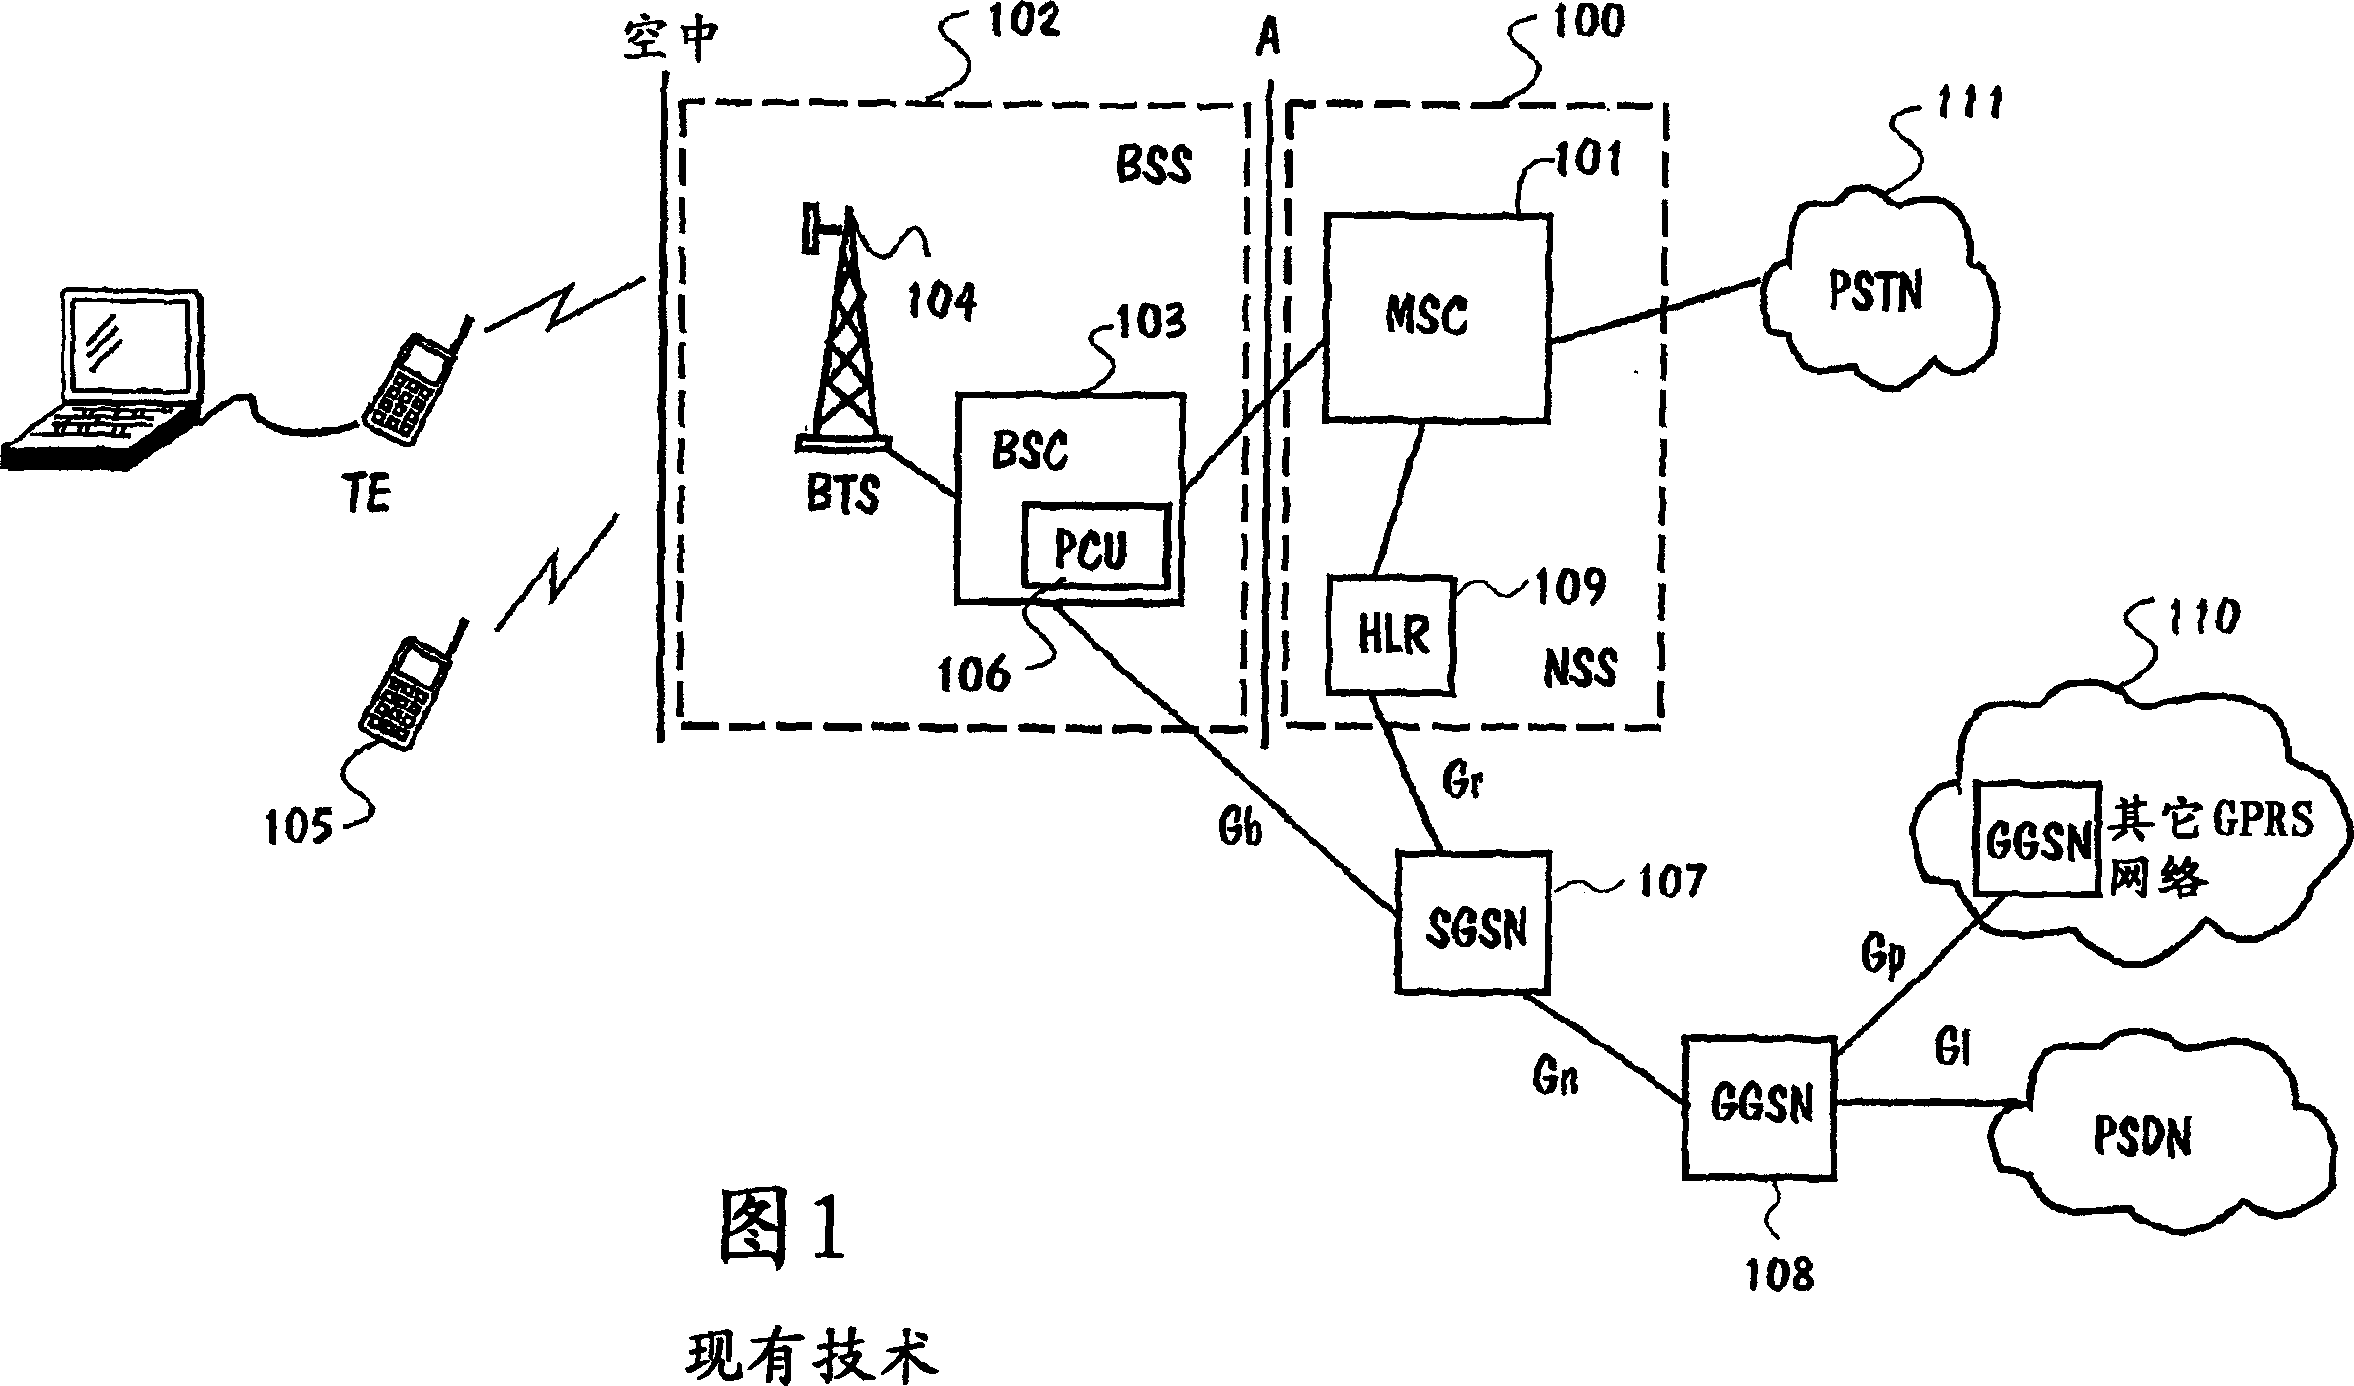 Flow control in packet-switched communication network using leaky bucket algorithm